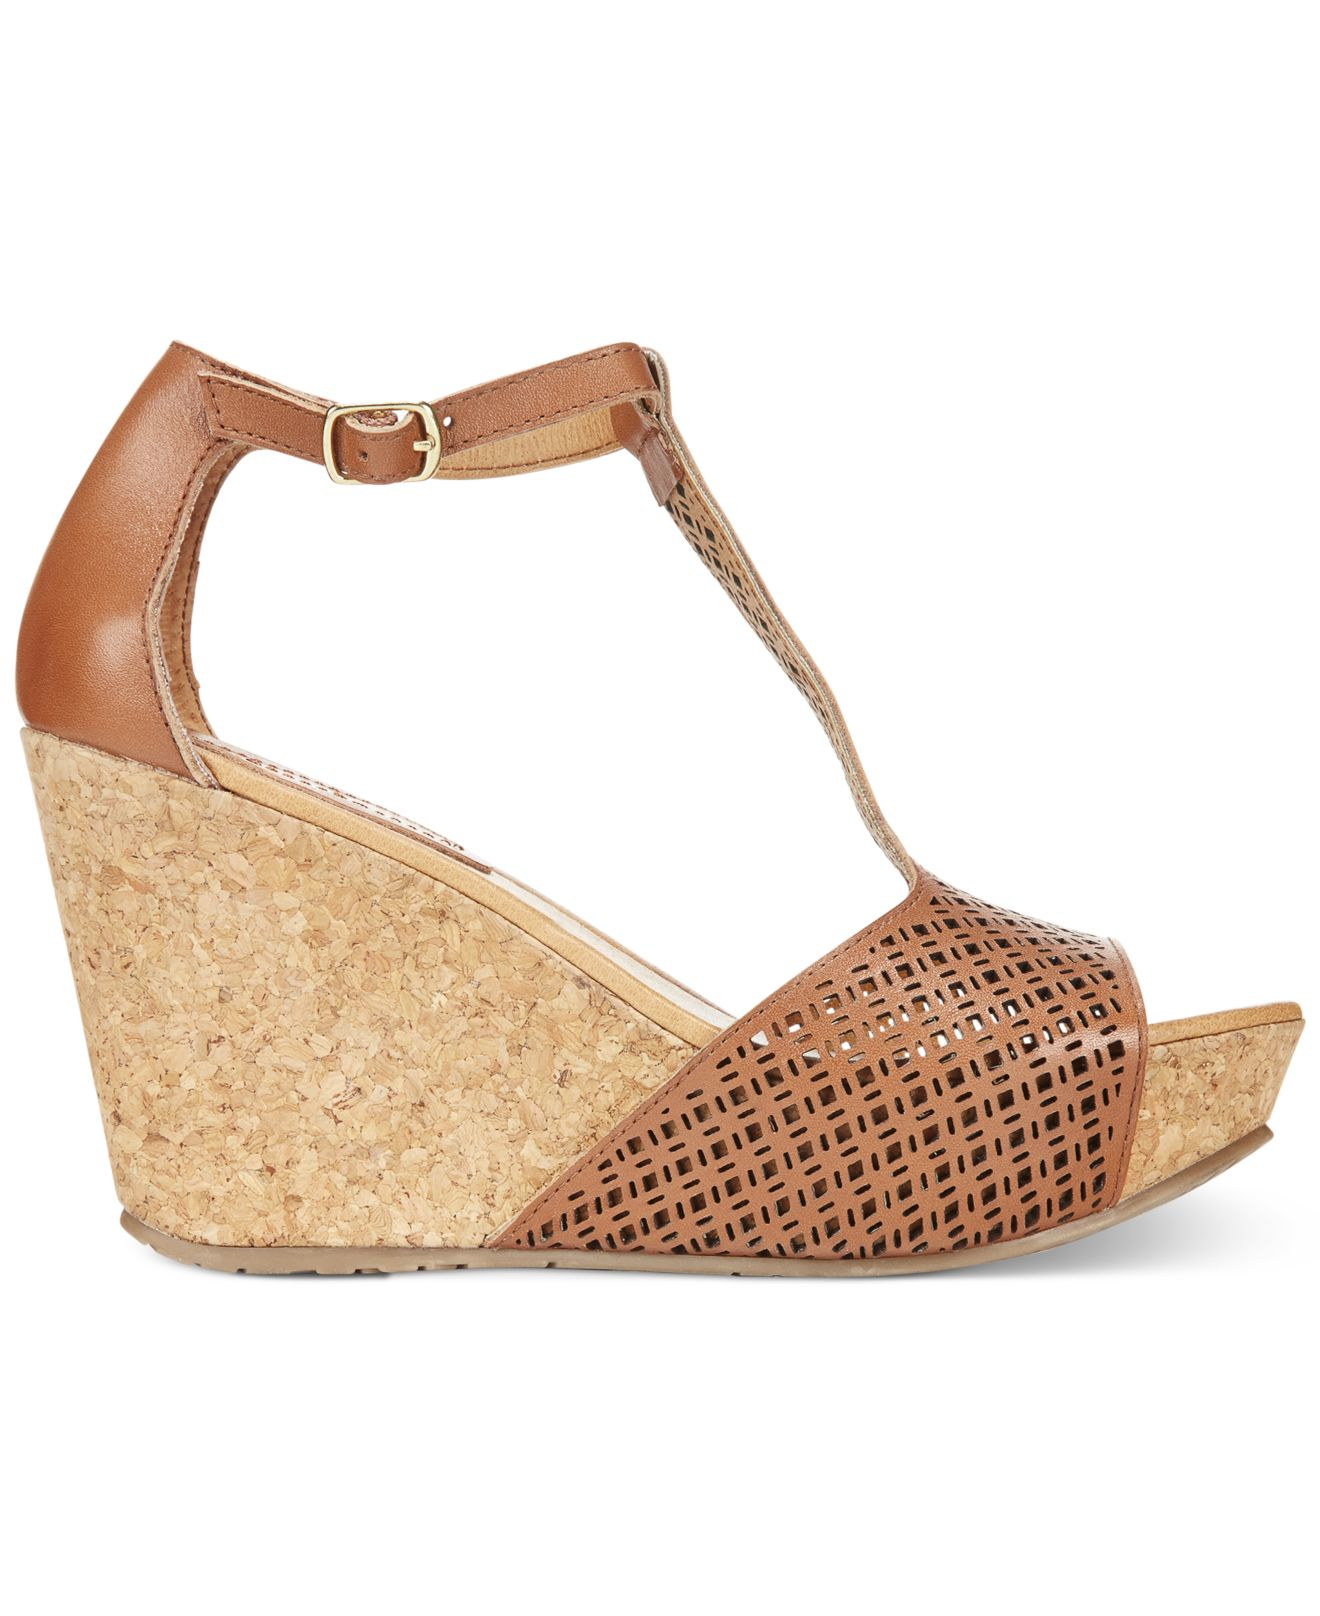 Kenneth Cole Reaction Kenneth Cole Women's Sole Tan Platform Wedge ...